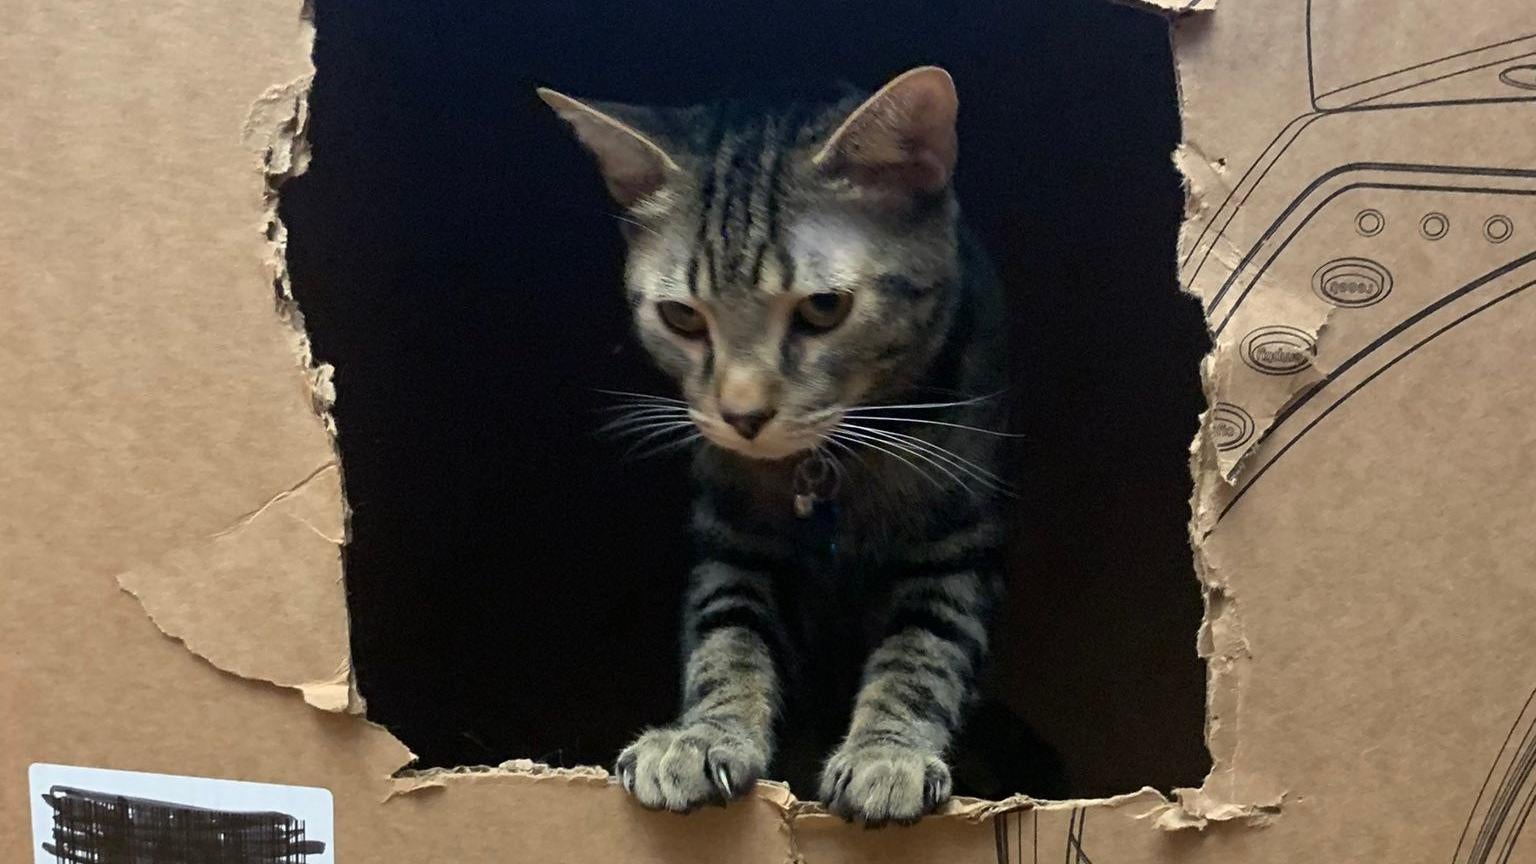 Larry eventually got in the box but refused to enter the inner chamber itself. (Photo: Tom McKay / Gizmodo)